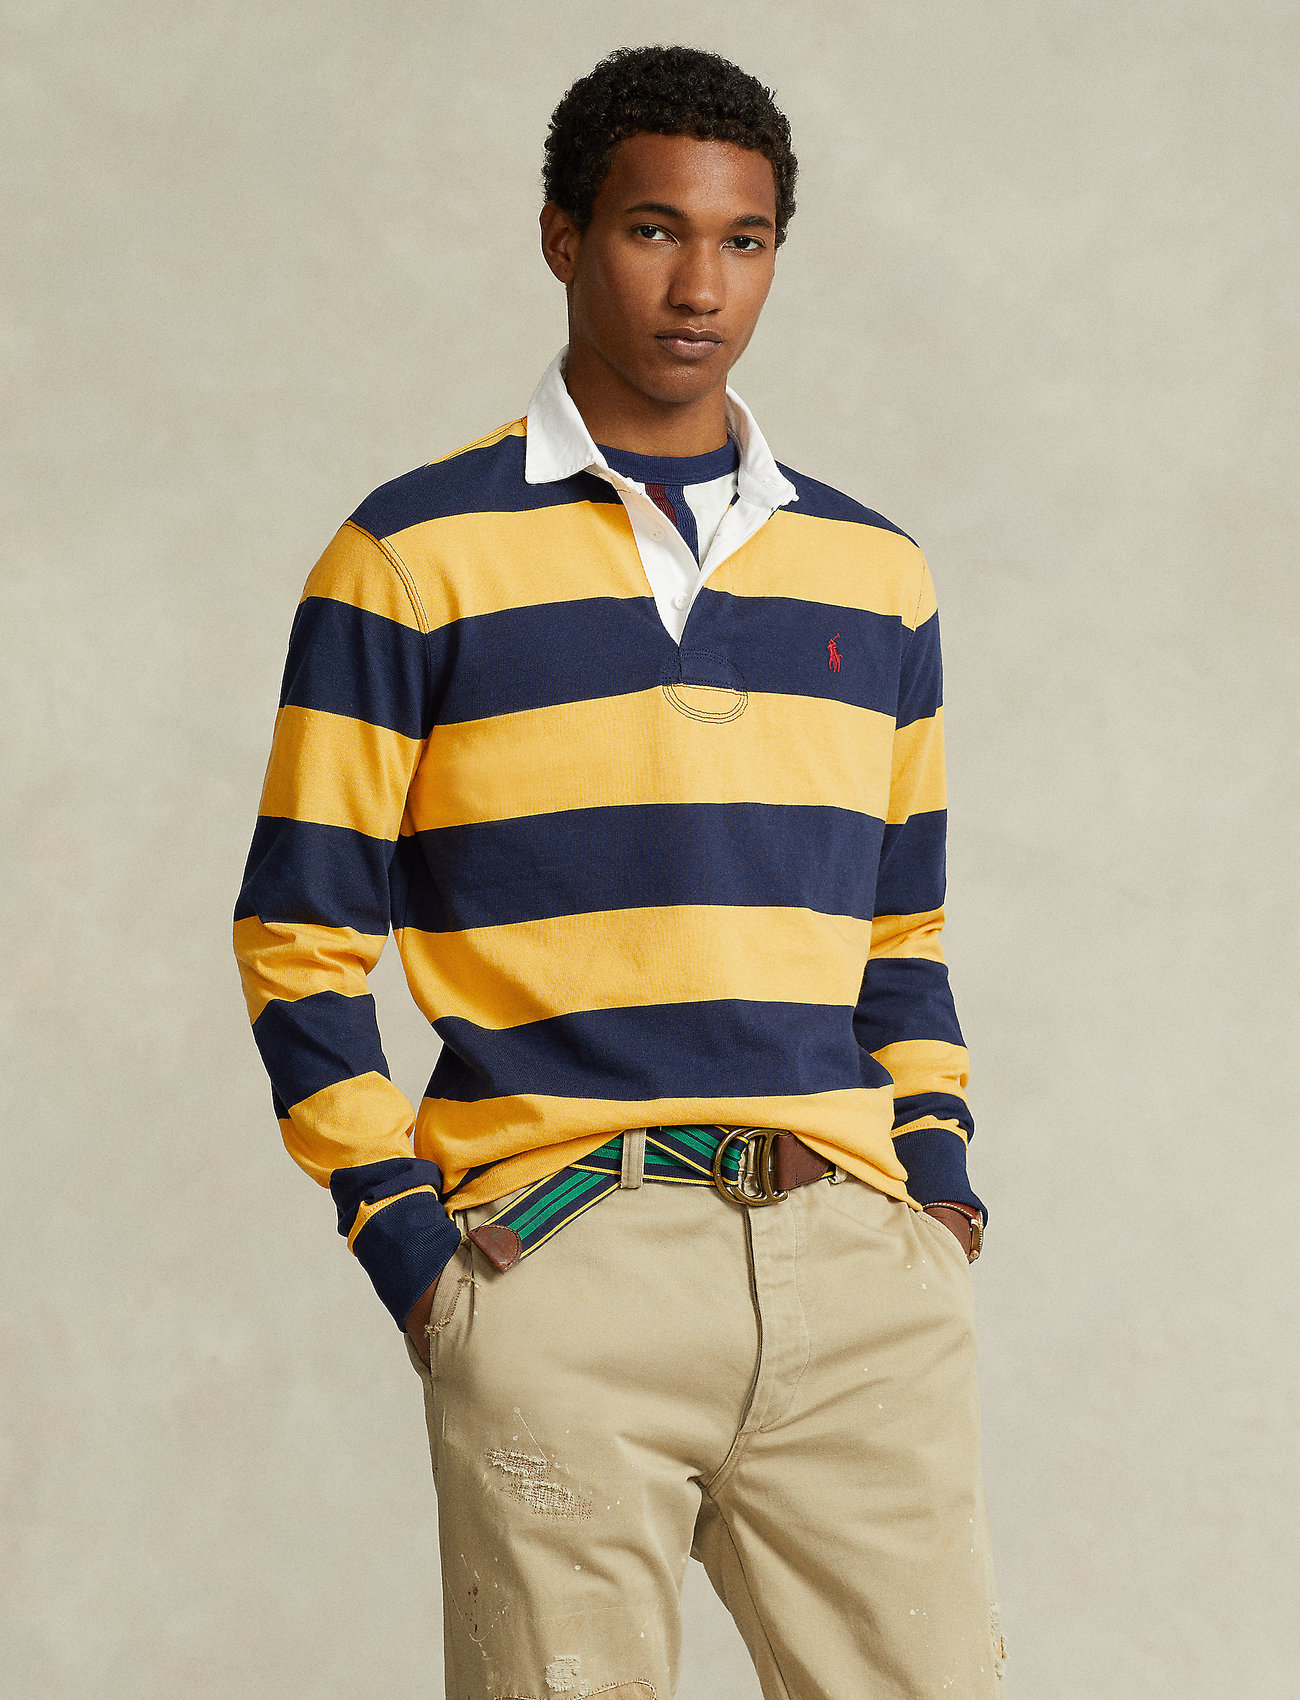 Polo Ralph Lauren The Iconic Rugby Shirt - Long-sleeved polos